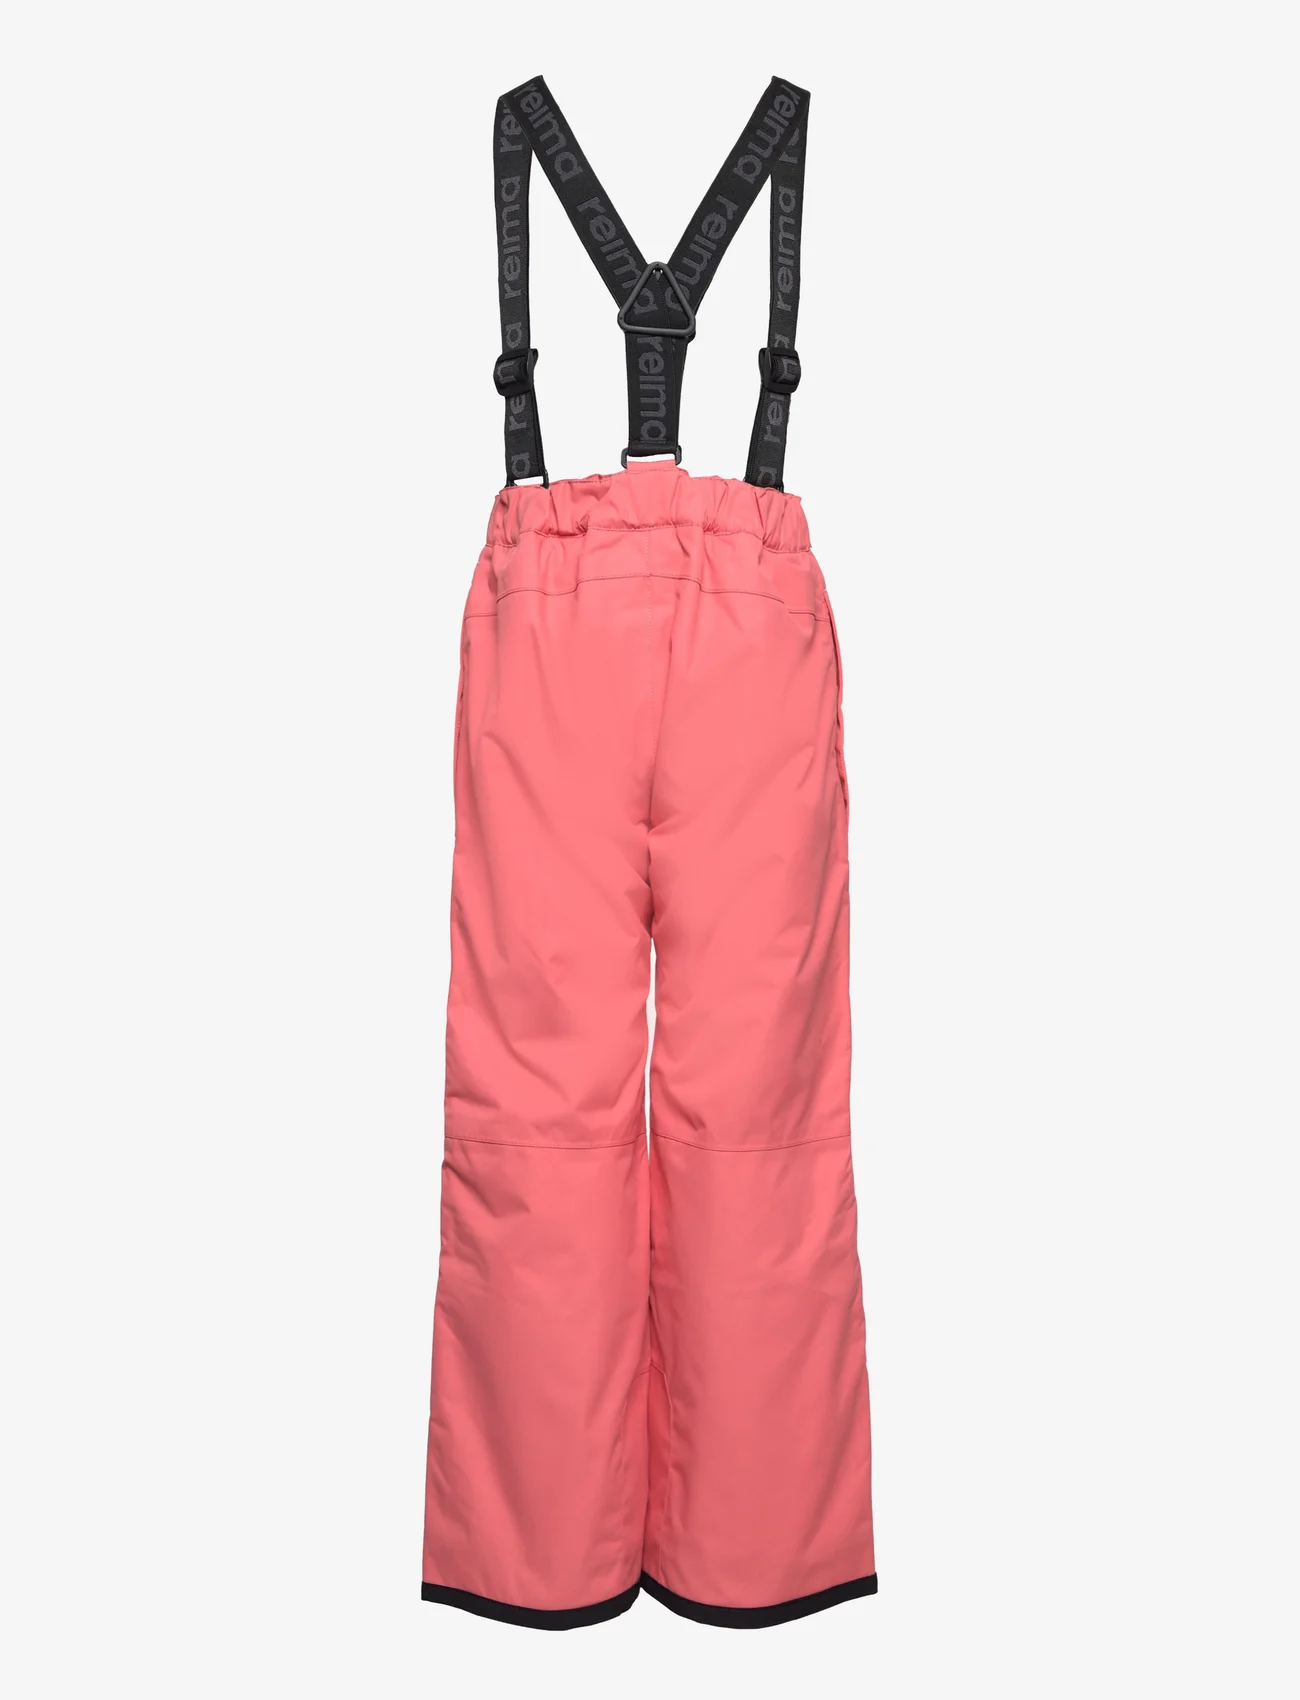 Reima - Kids' winter trousers Proxima - doły - pink coral - 1